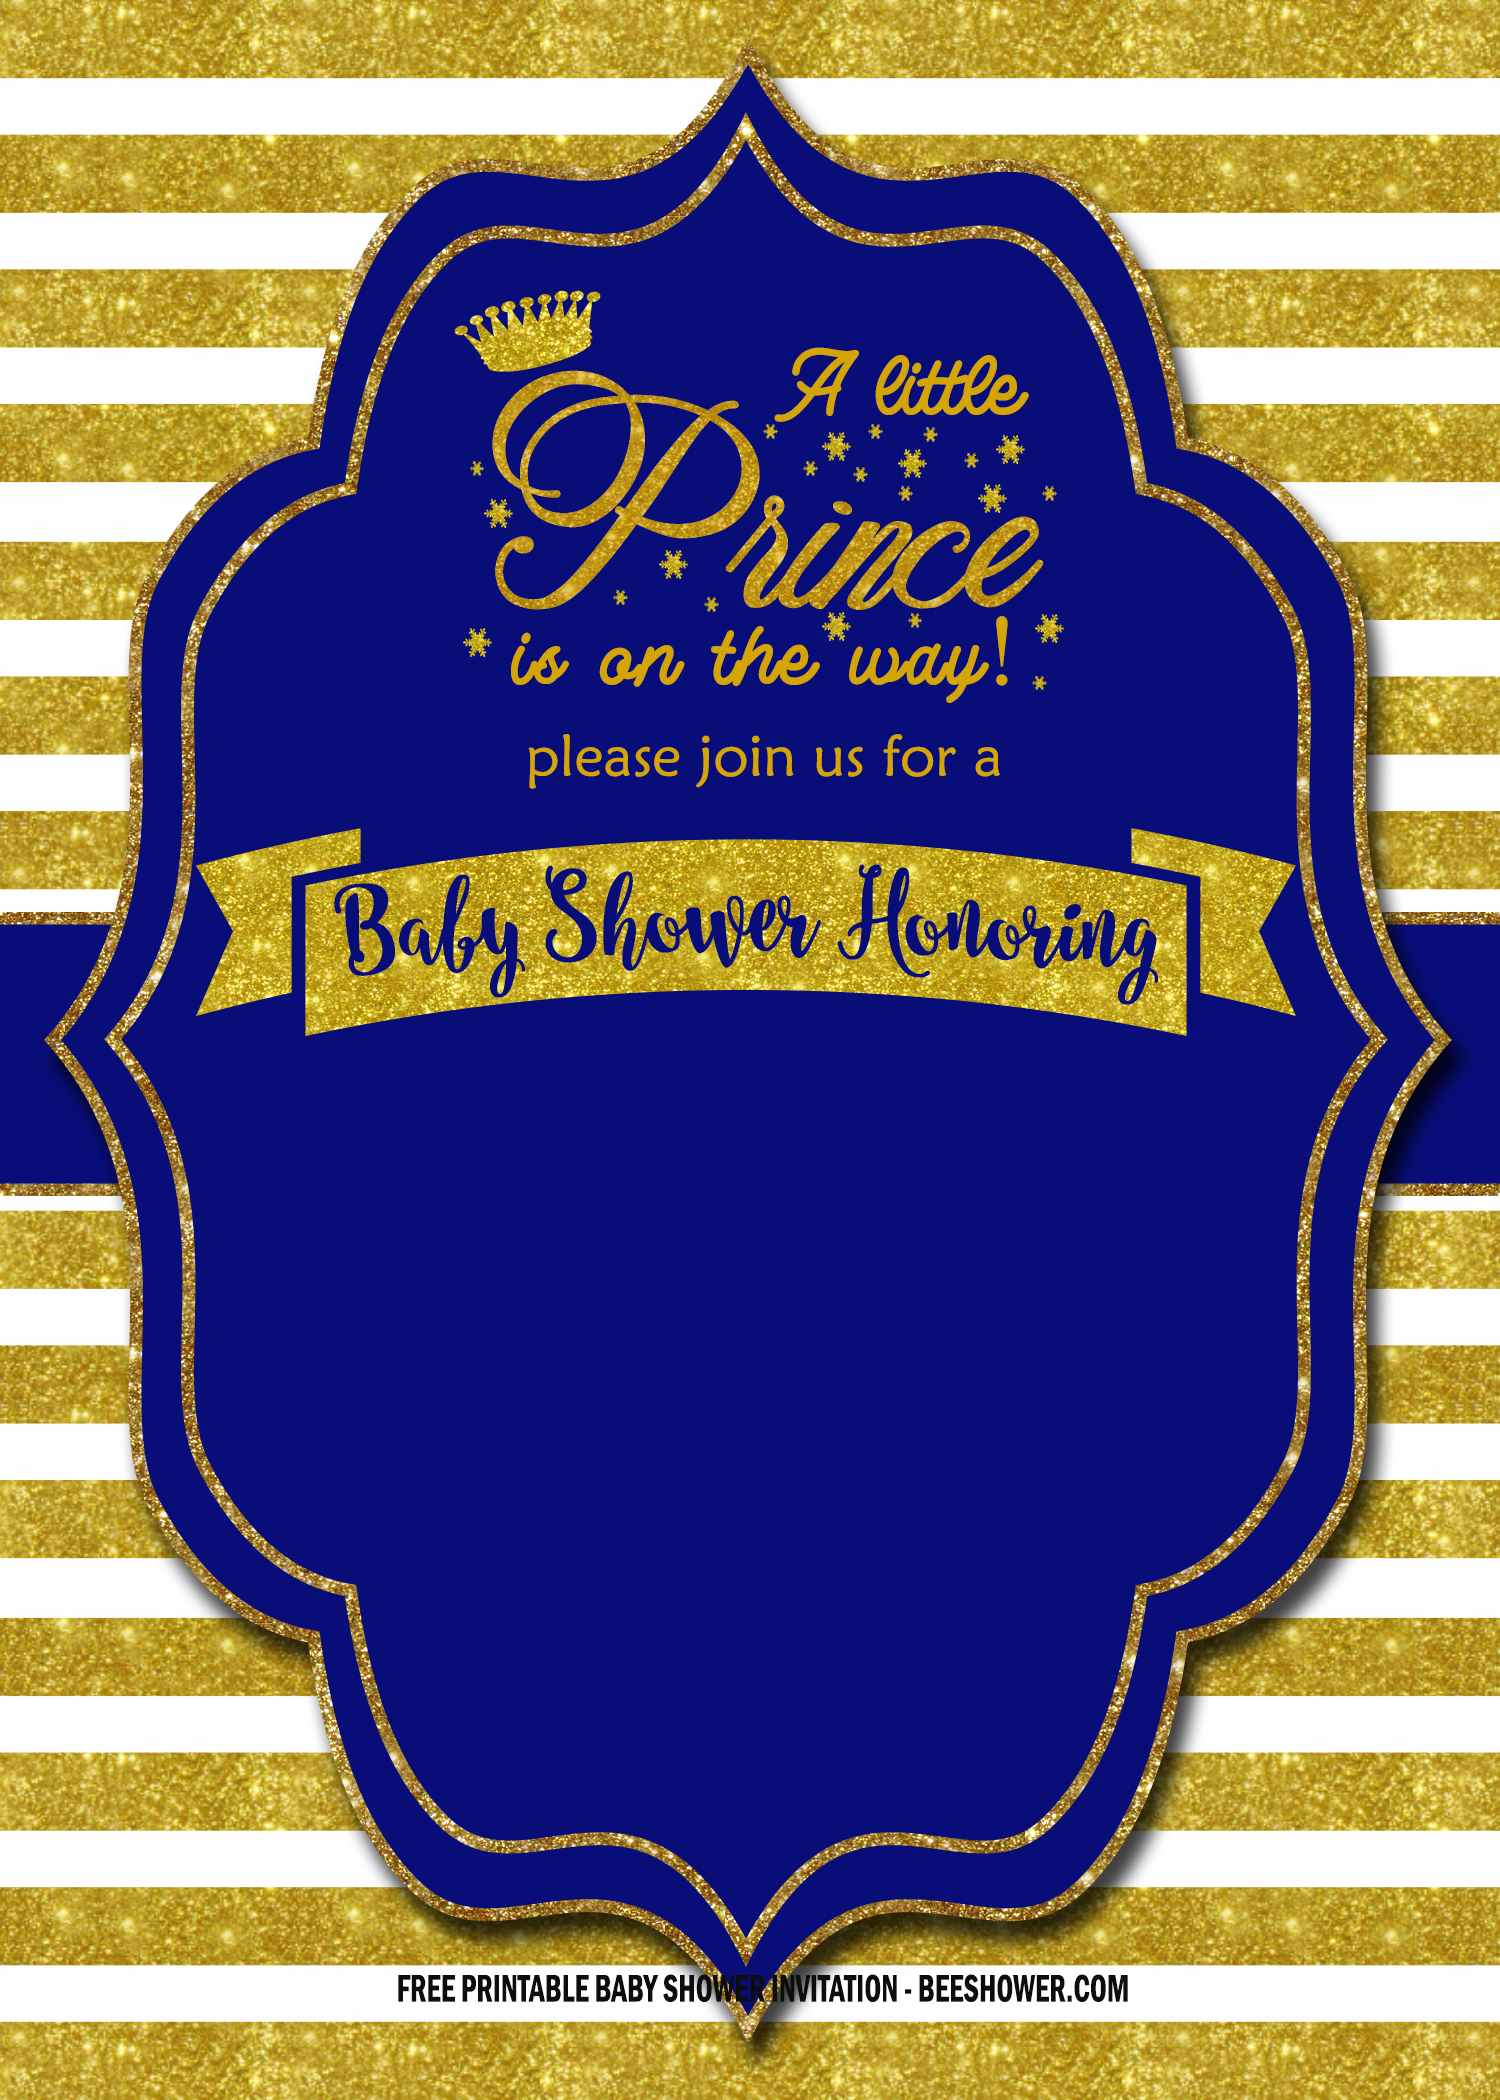 FREE Blue and Gold Royal Party Invitations  FREE Printable